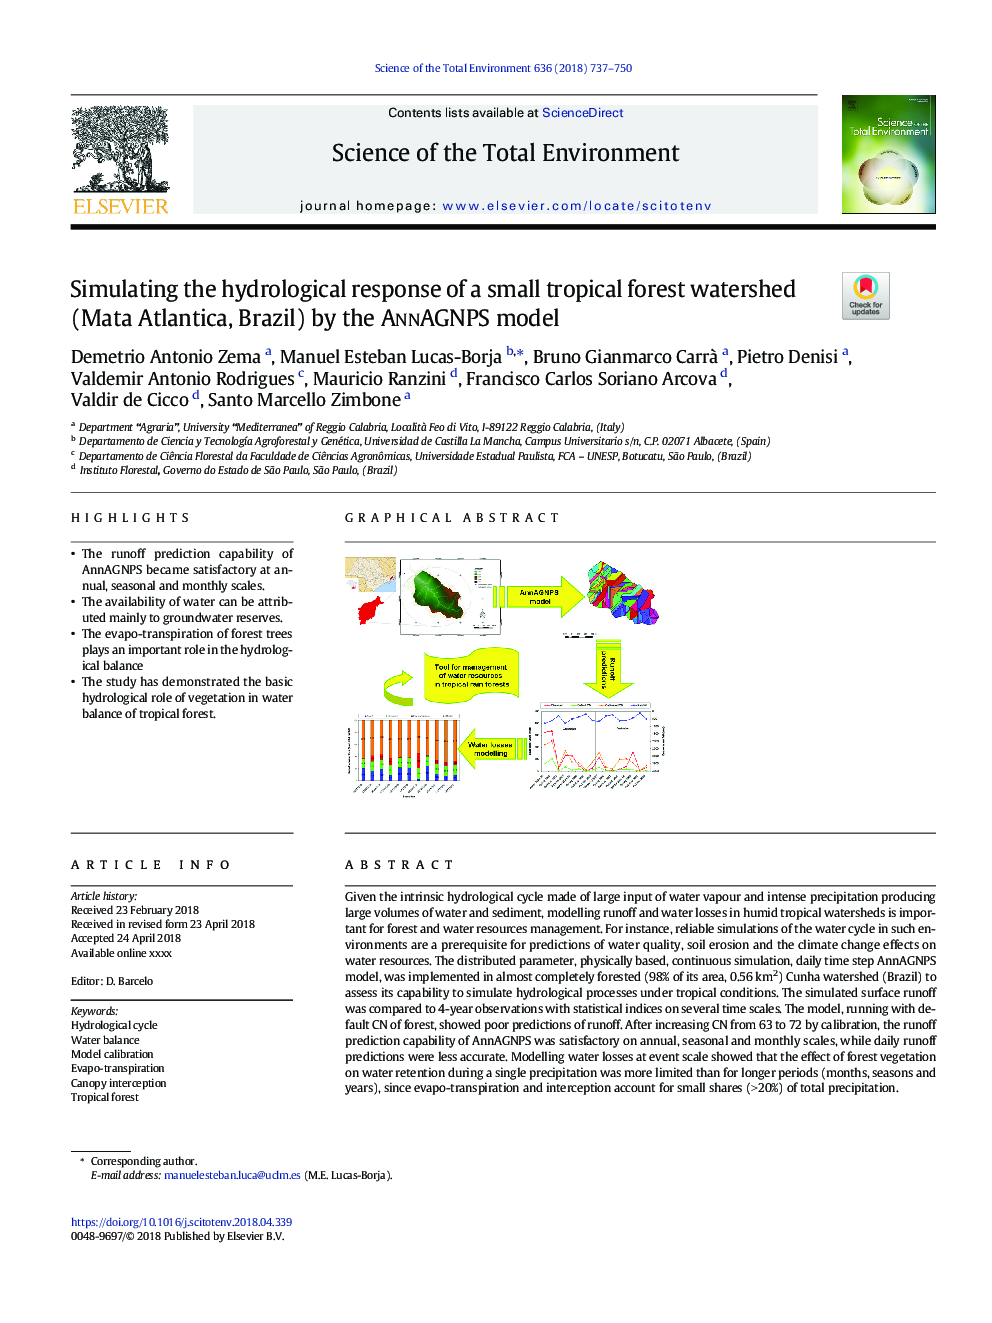 Simulating the hydrological response of a small tropical forest watershed (Mata Atlantica, Brazil) by the AnnAGNPS model